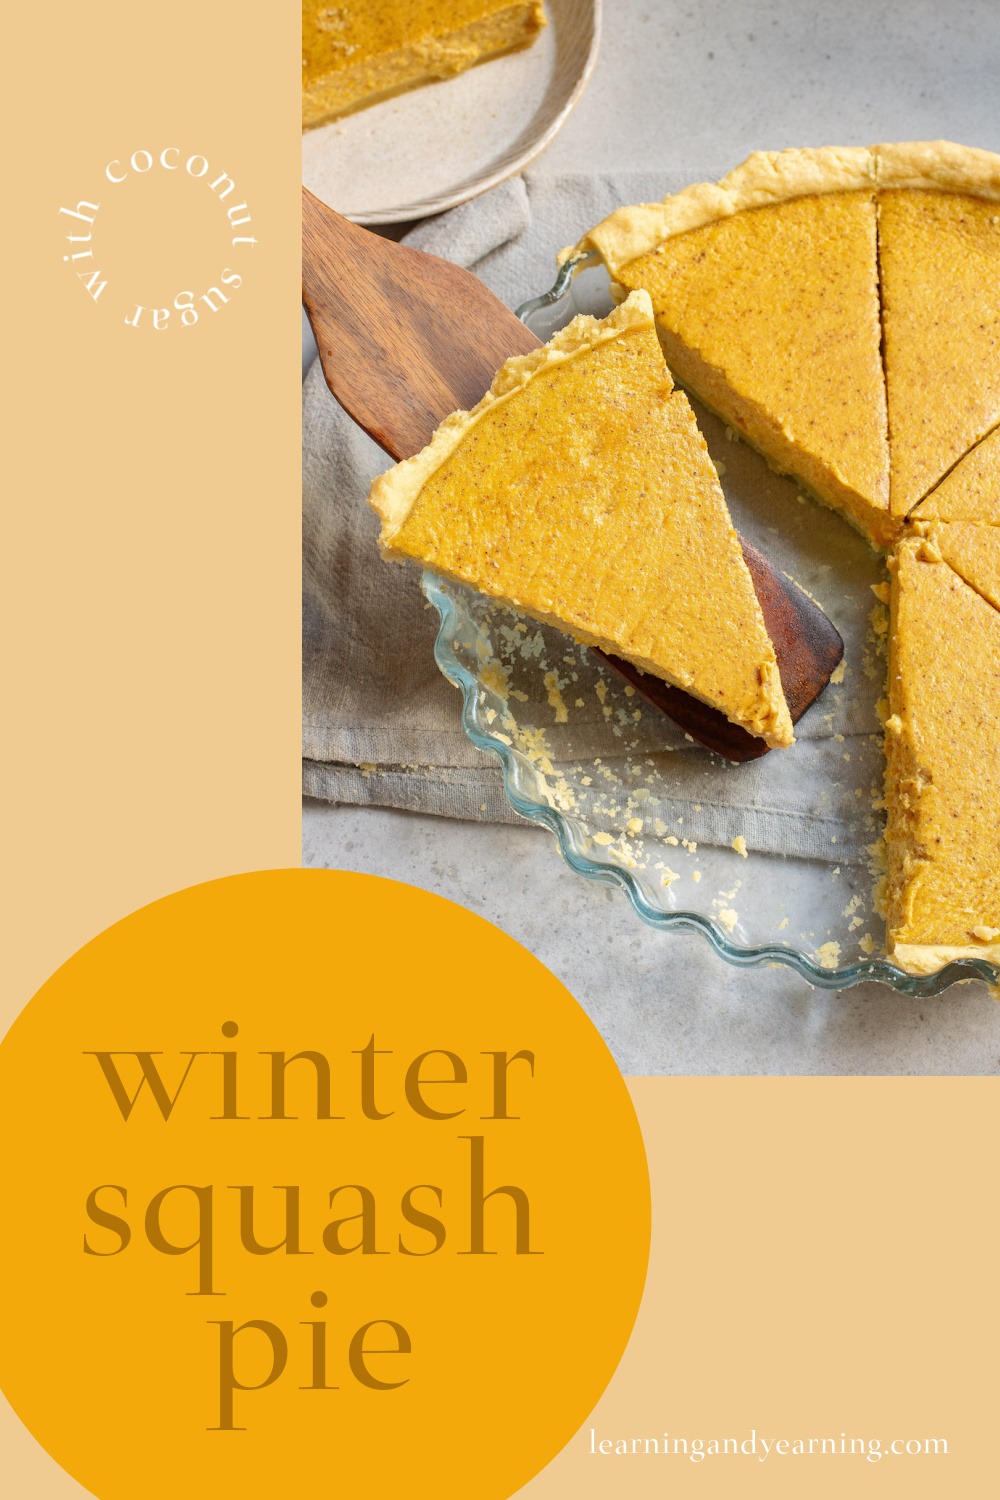 Winter squash pie sweetened with coconut sugar!